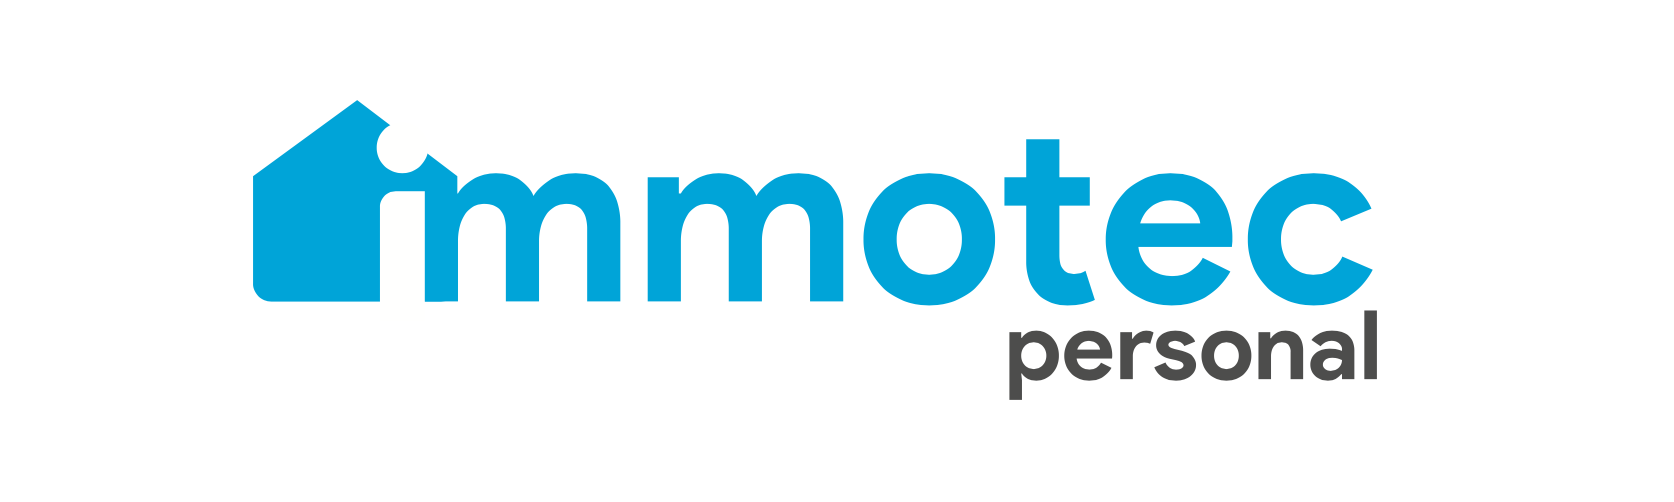 immotec-personal-phase4-design-logo